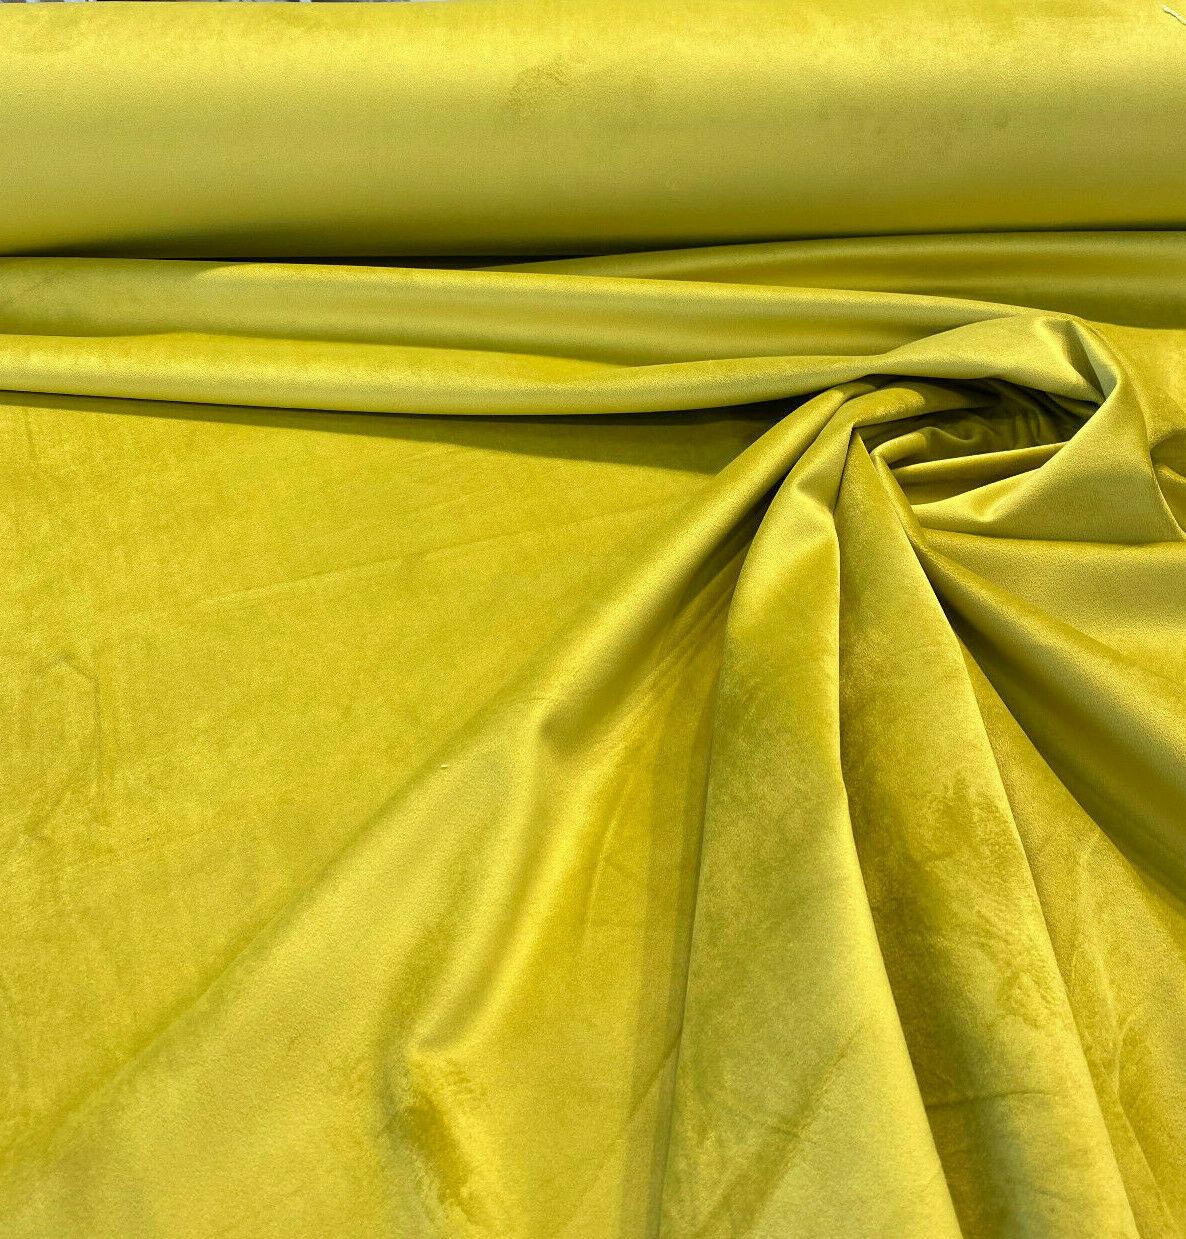 Gold Velvet Upholstery and Drapery Fabric by Decorative Fabrics Direct